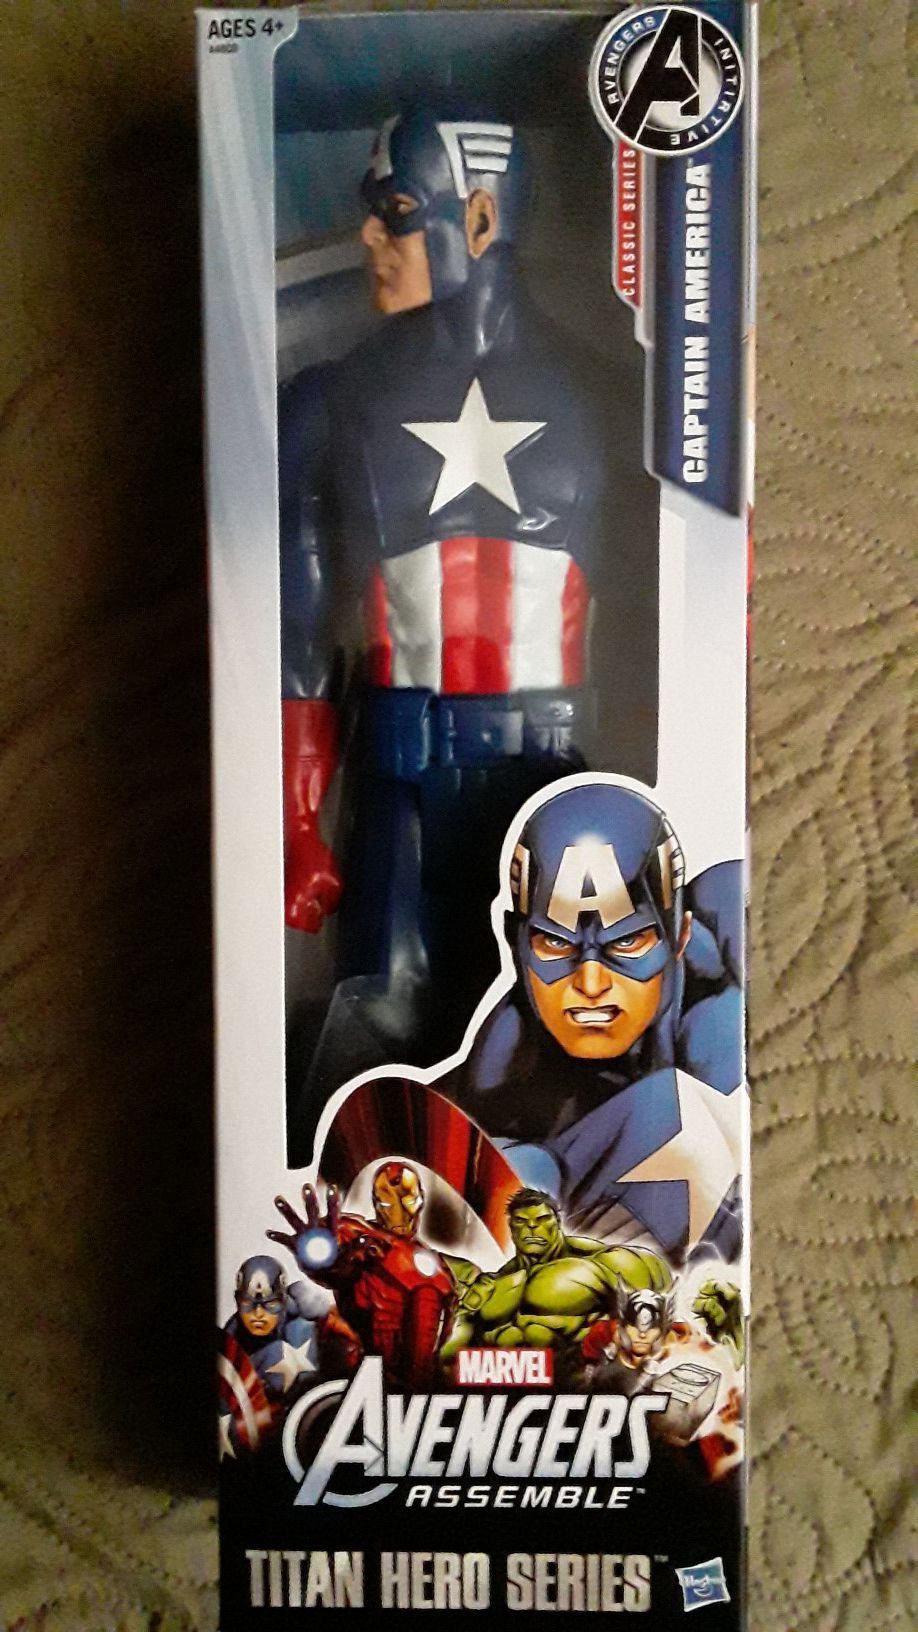 AVENGERS CAPTAIN AMERICA ACTION FIGURE NEW TOYS $10 ✔✔✔PRICE IS FIRM✔✔✔